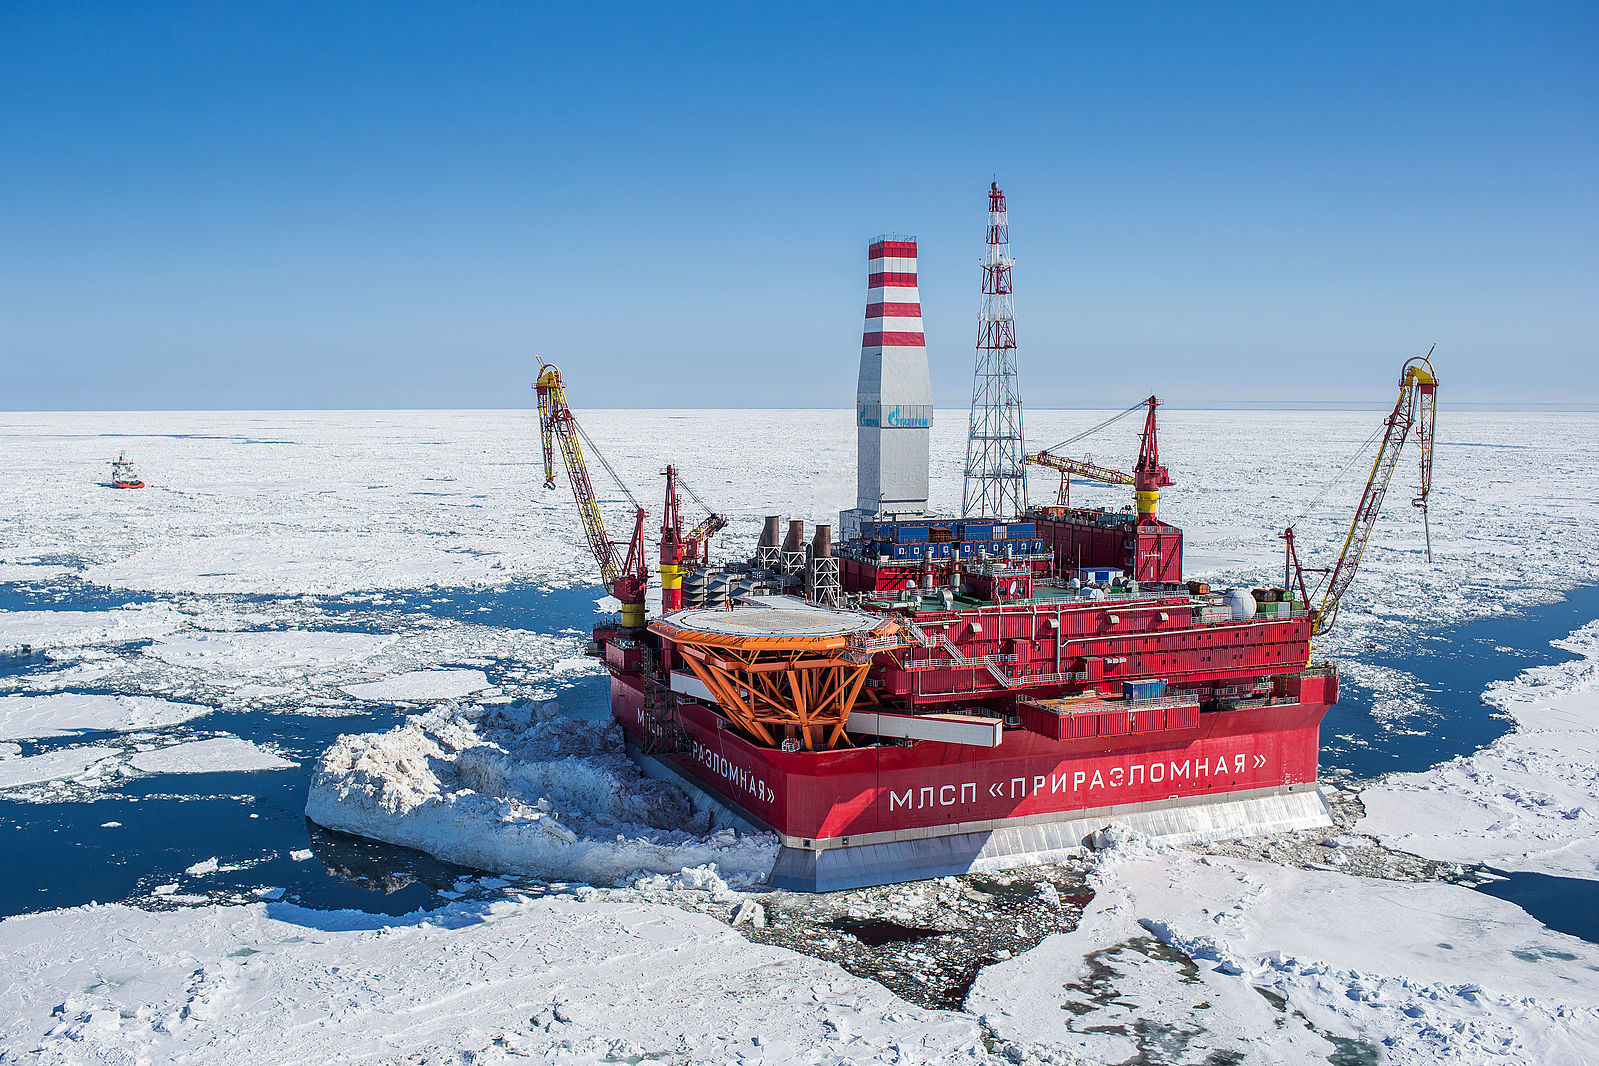 Cooperation & Competition in the Arctic Circle